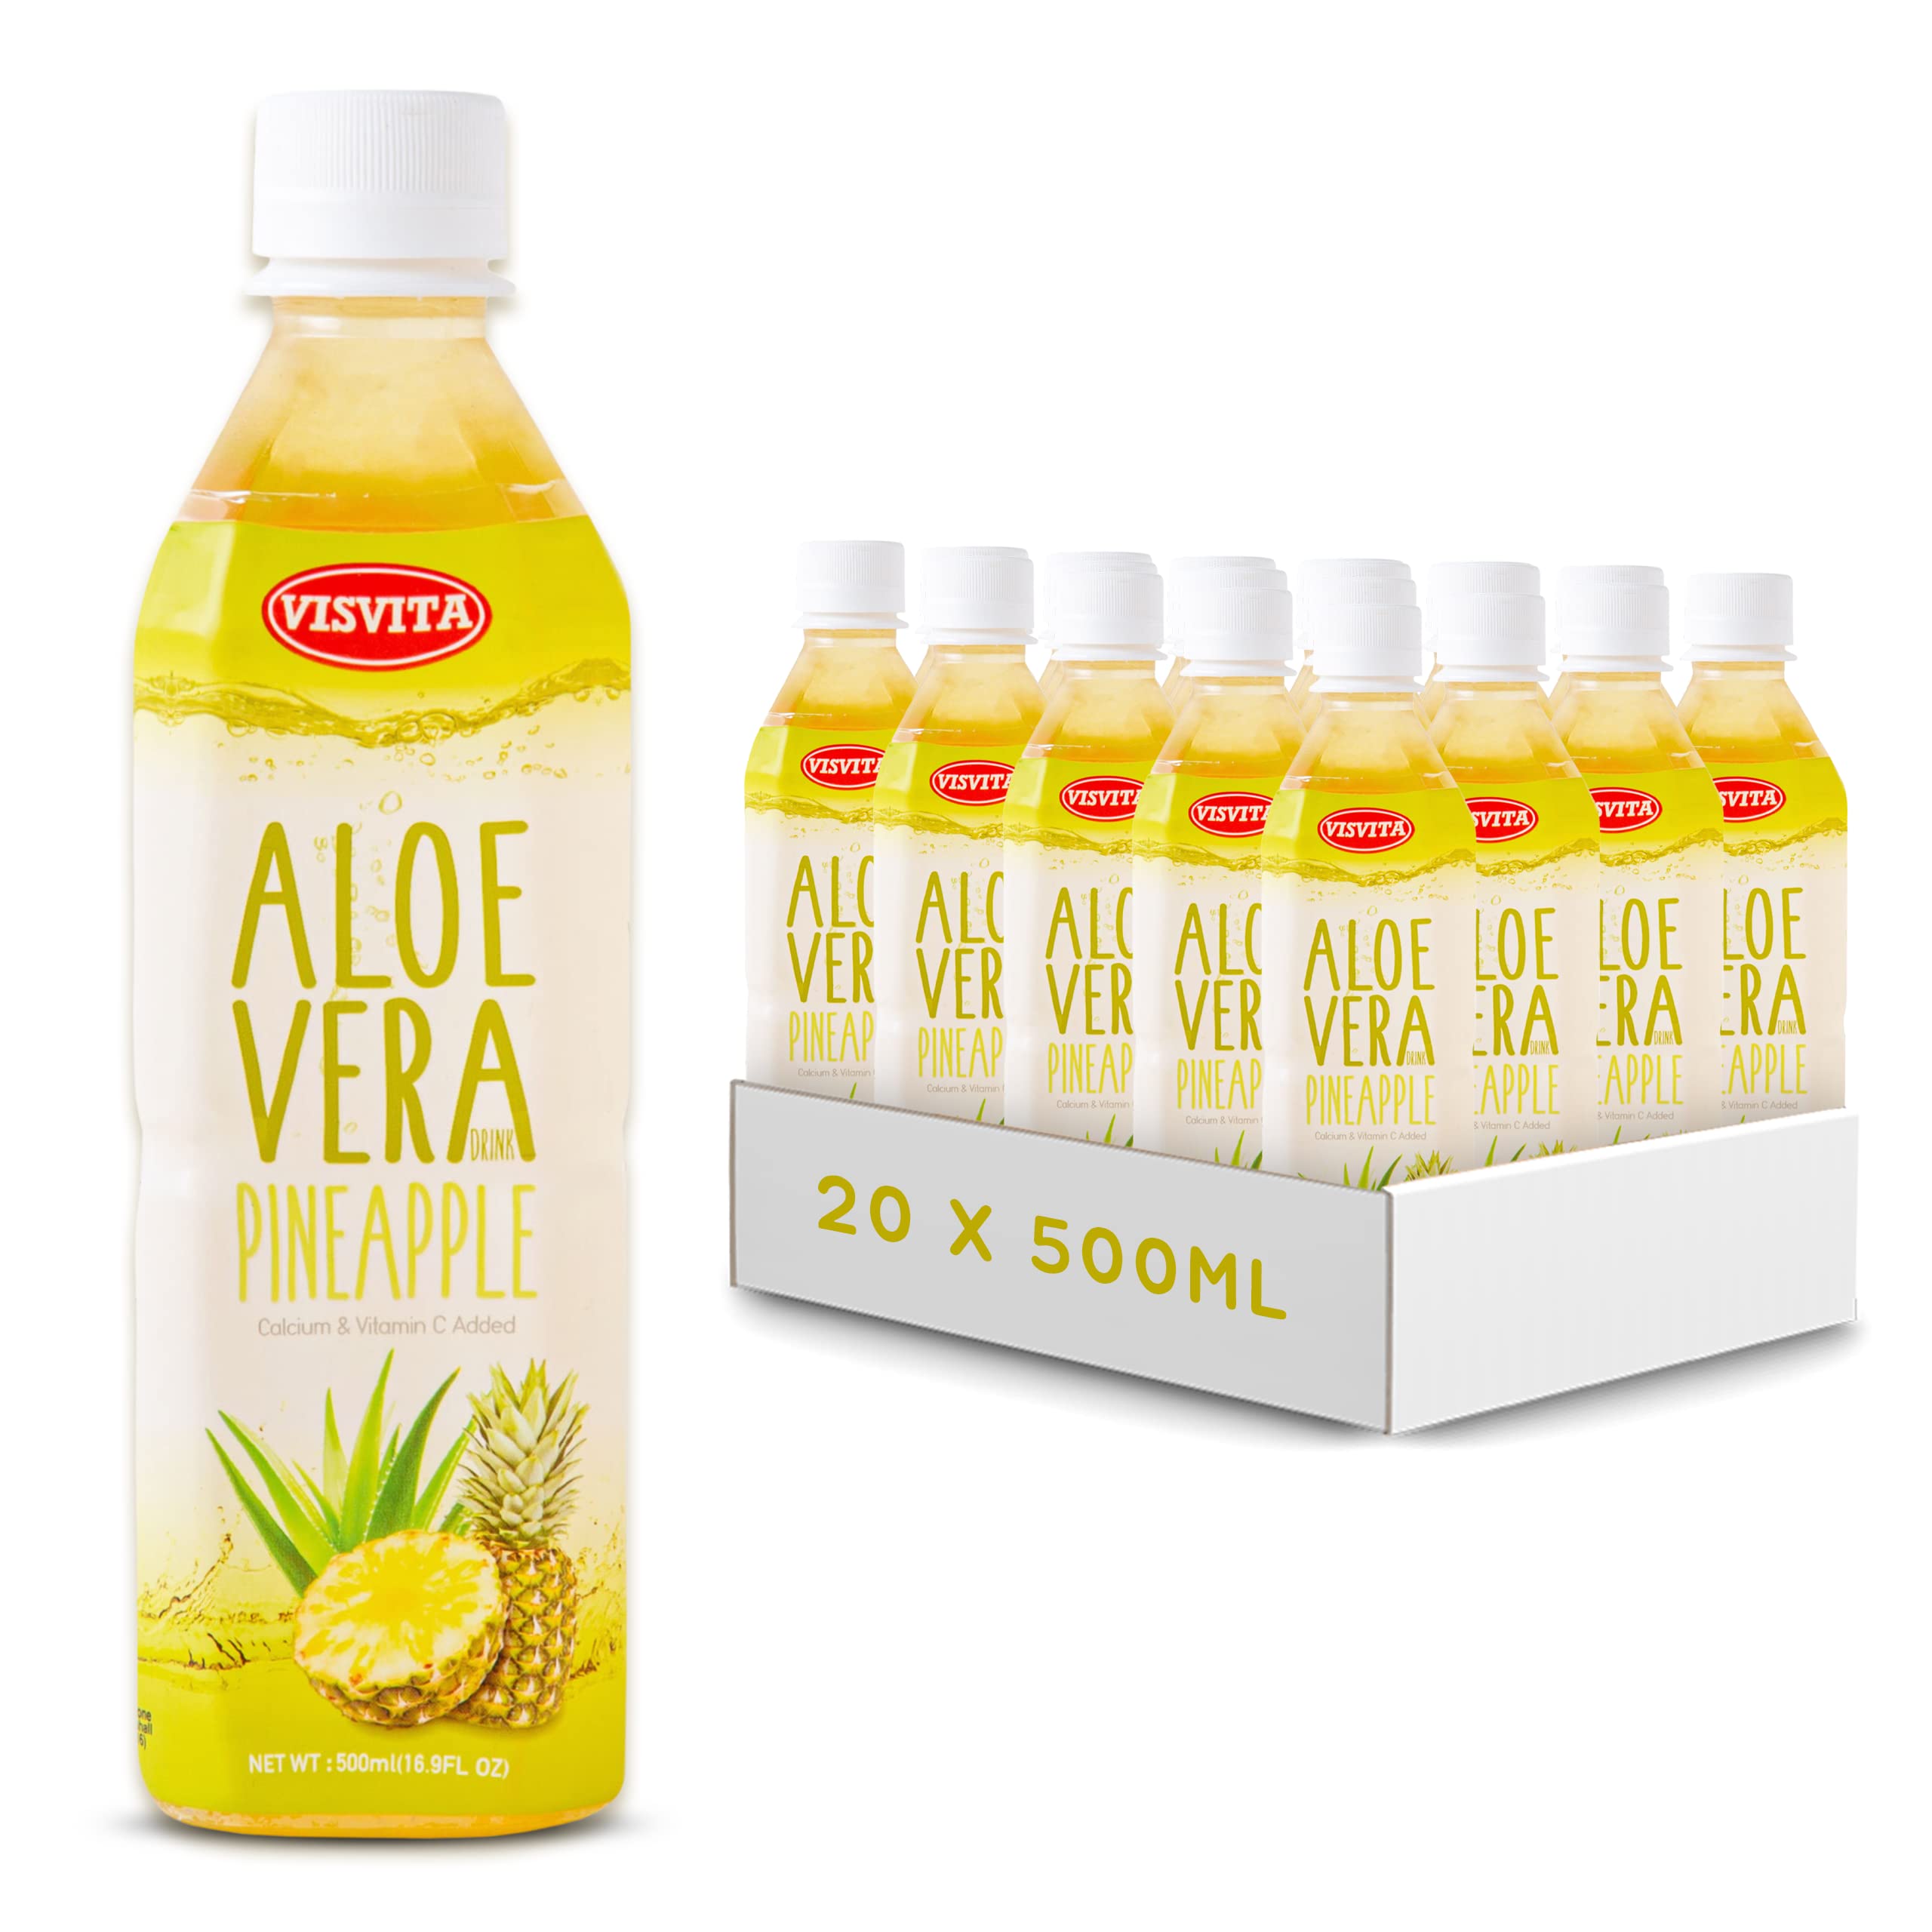 Aloe Vera Drink with Real Aloe Vera Pulp [Pineapple Flavor] Naturally Sweetened Beverage with Calcium and Vitamin C, No Artificial Preservatives or...